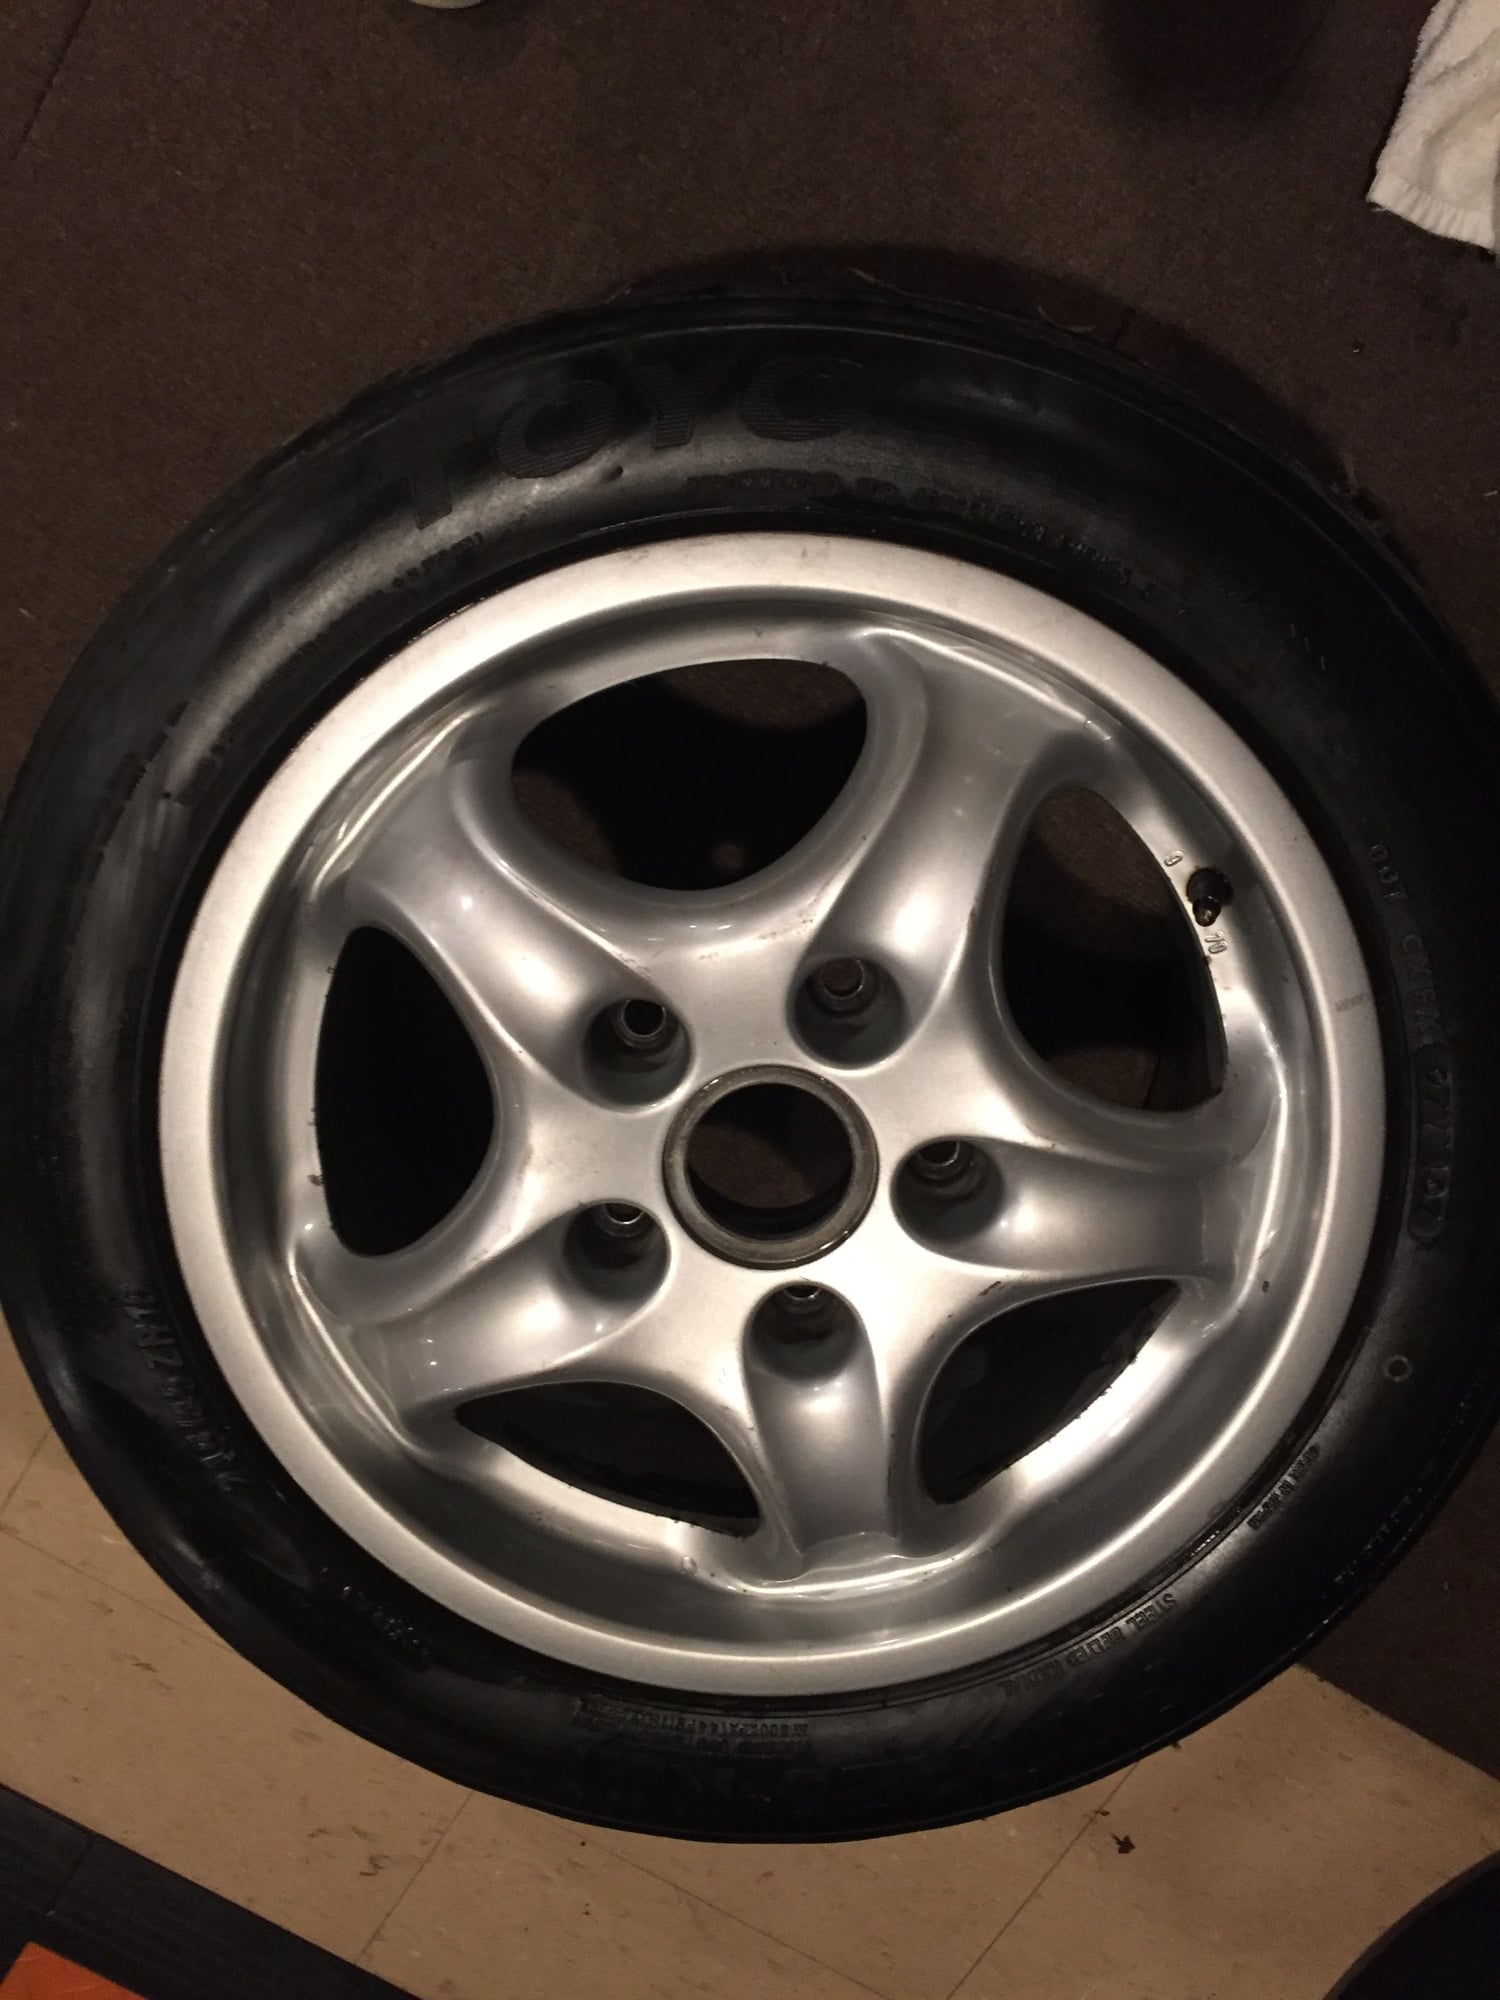 Wheels and Tires/Axles - Set of 4 Porsche 993 Cup 16 inch wheels - Used - 1995 to 1998 Porsche 911 - Pleasanton, CA 94566, United States